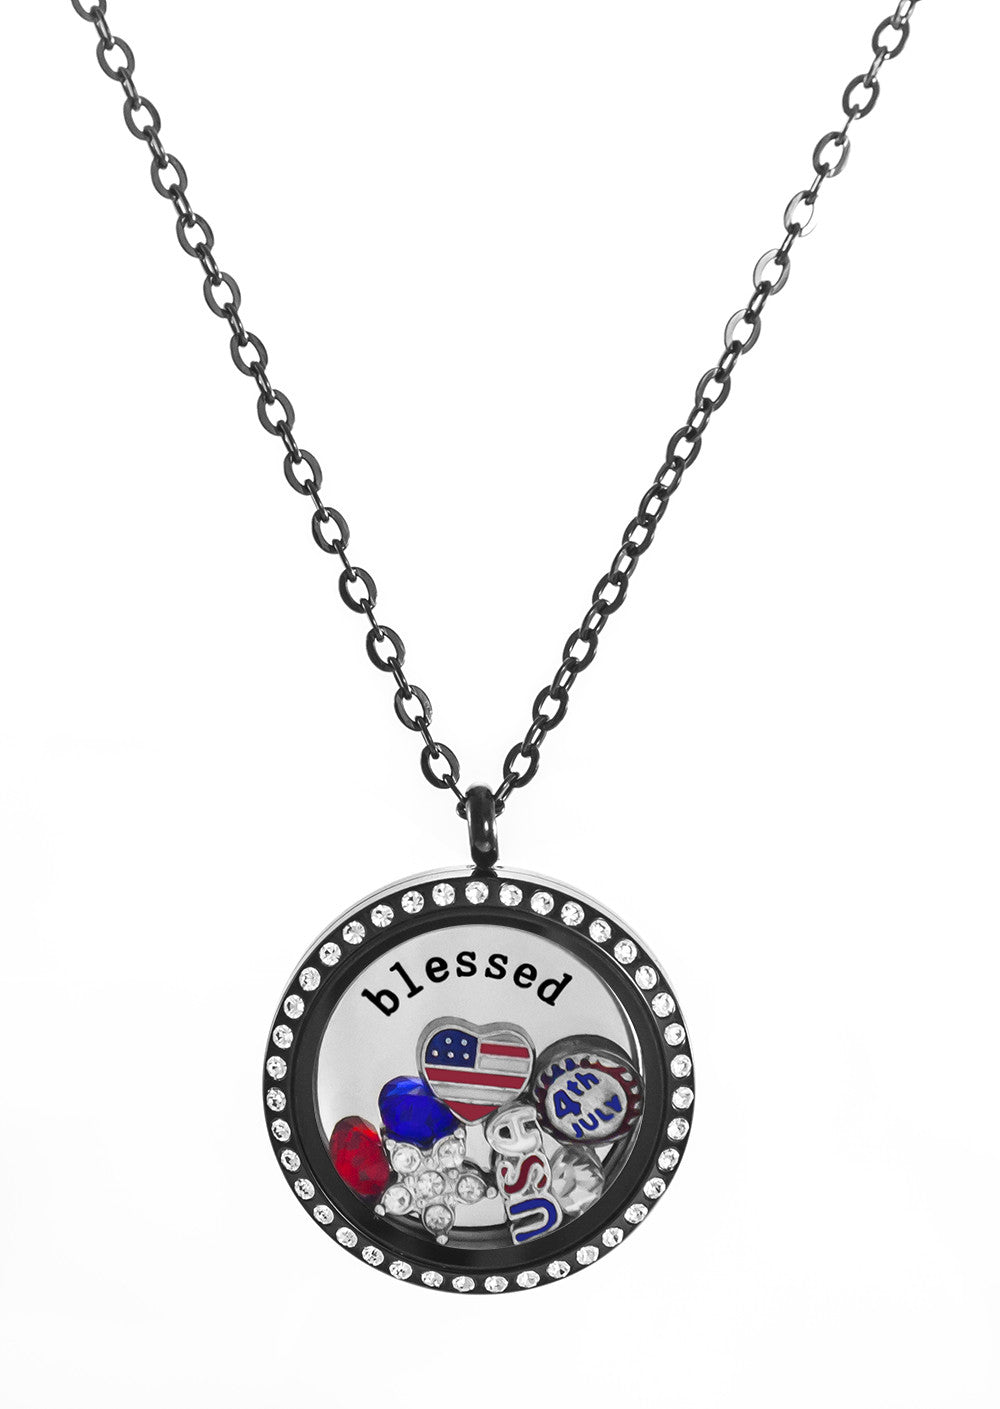 Stainless Steel Floating Charm Locket 4th of July Celebration Necklace by BG247®